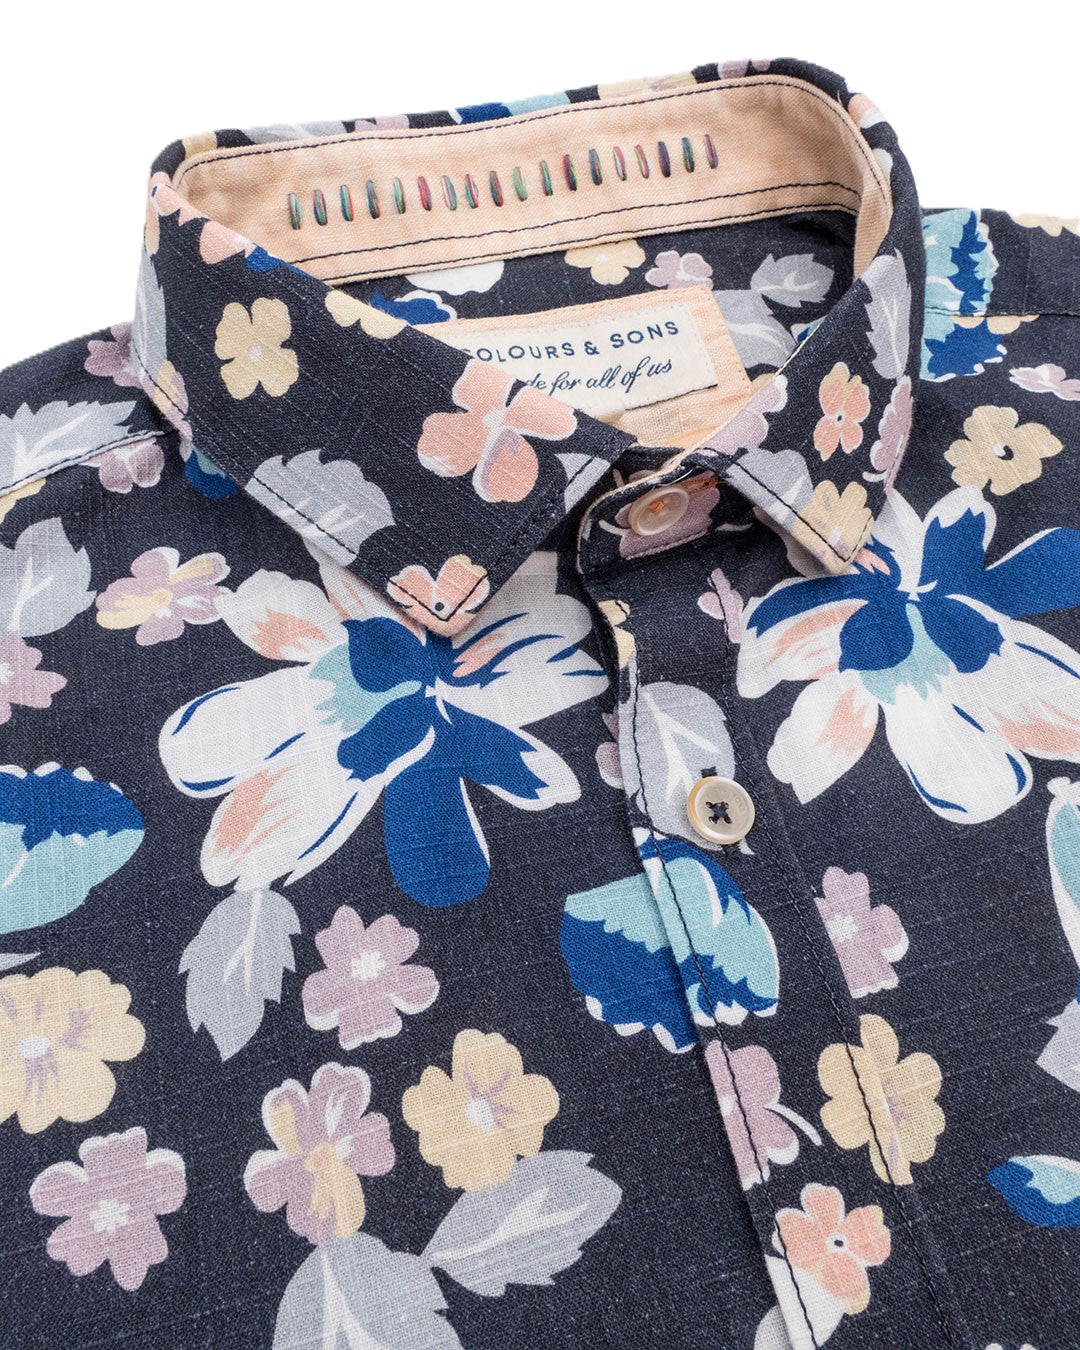 Colours & Sons LS Flower Shirt Navy/Pink